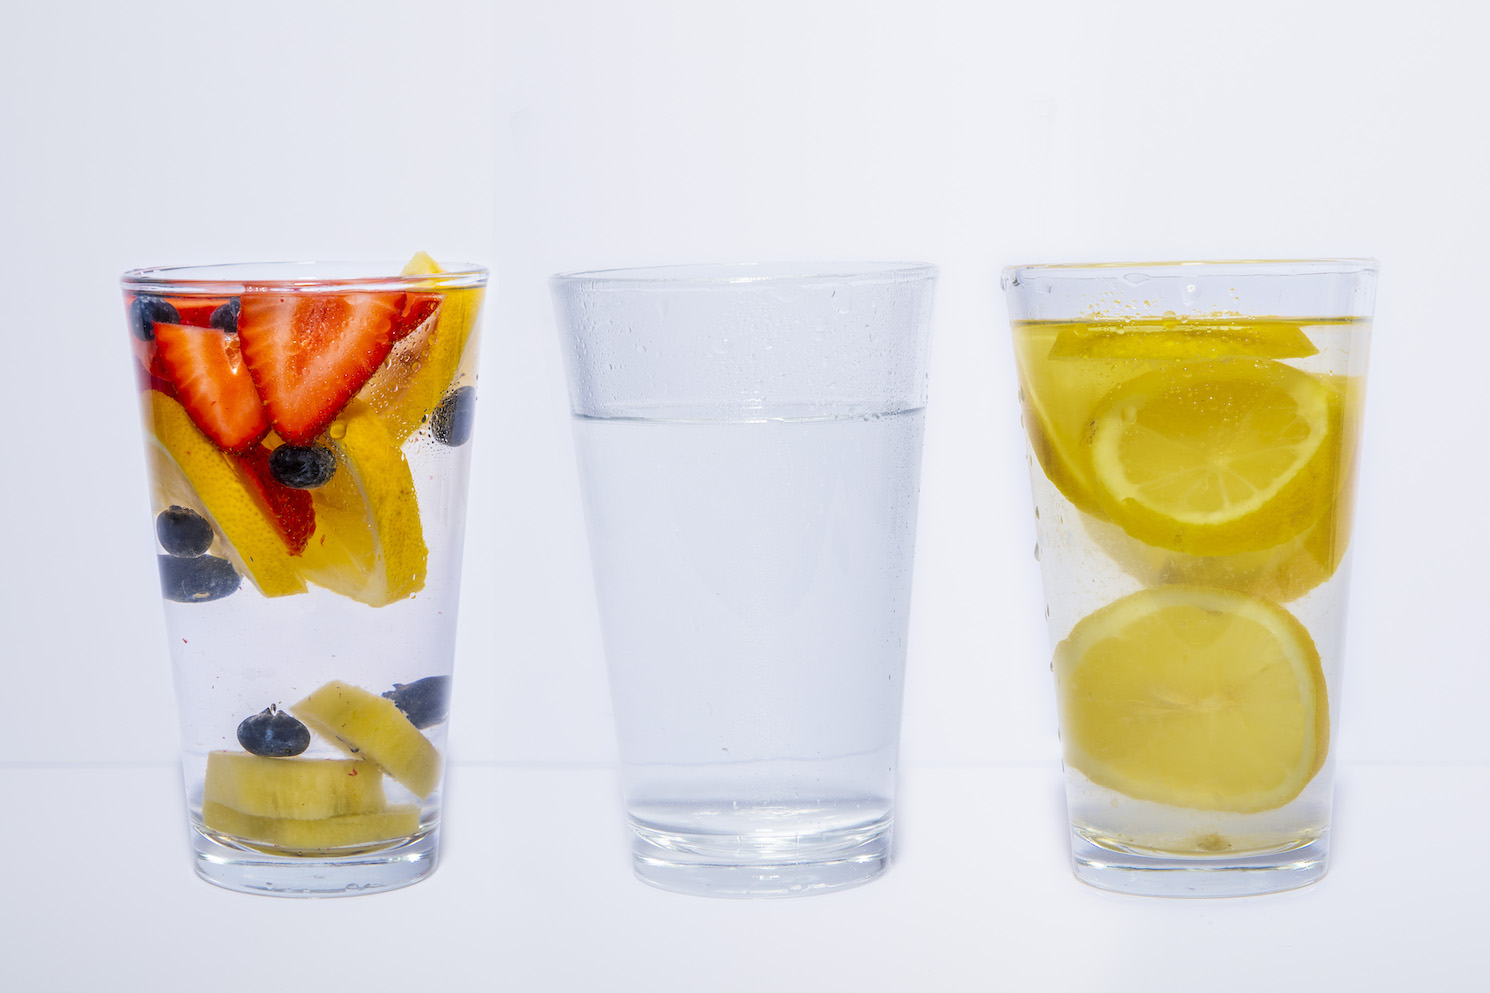 Three glasses of water against a white background. Two of the three glasses of water have lemon slices in them, and one of the three also has berries.